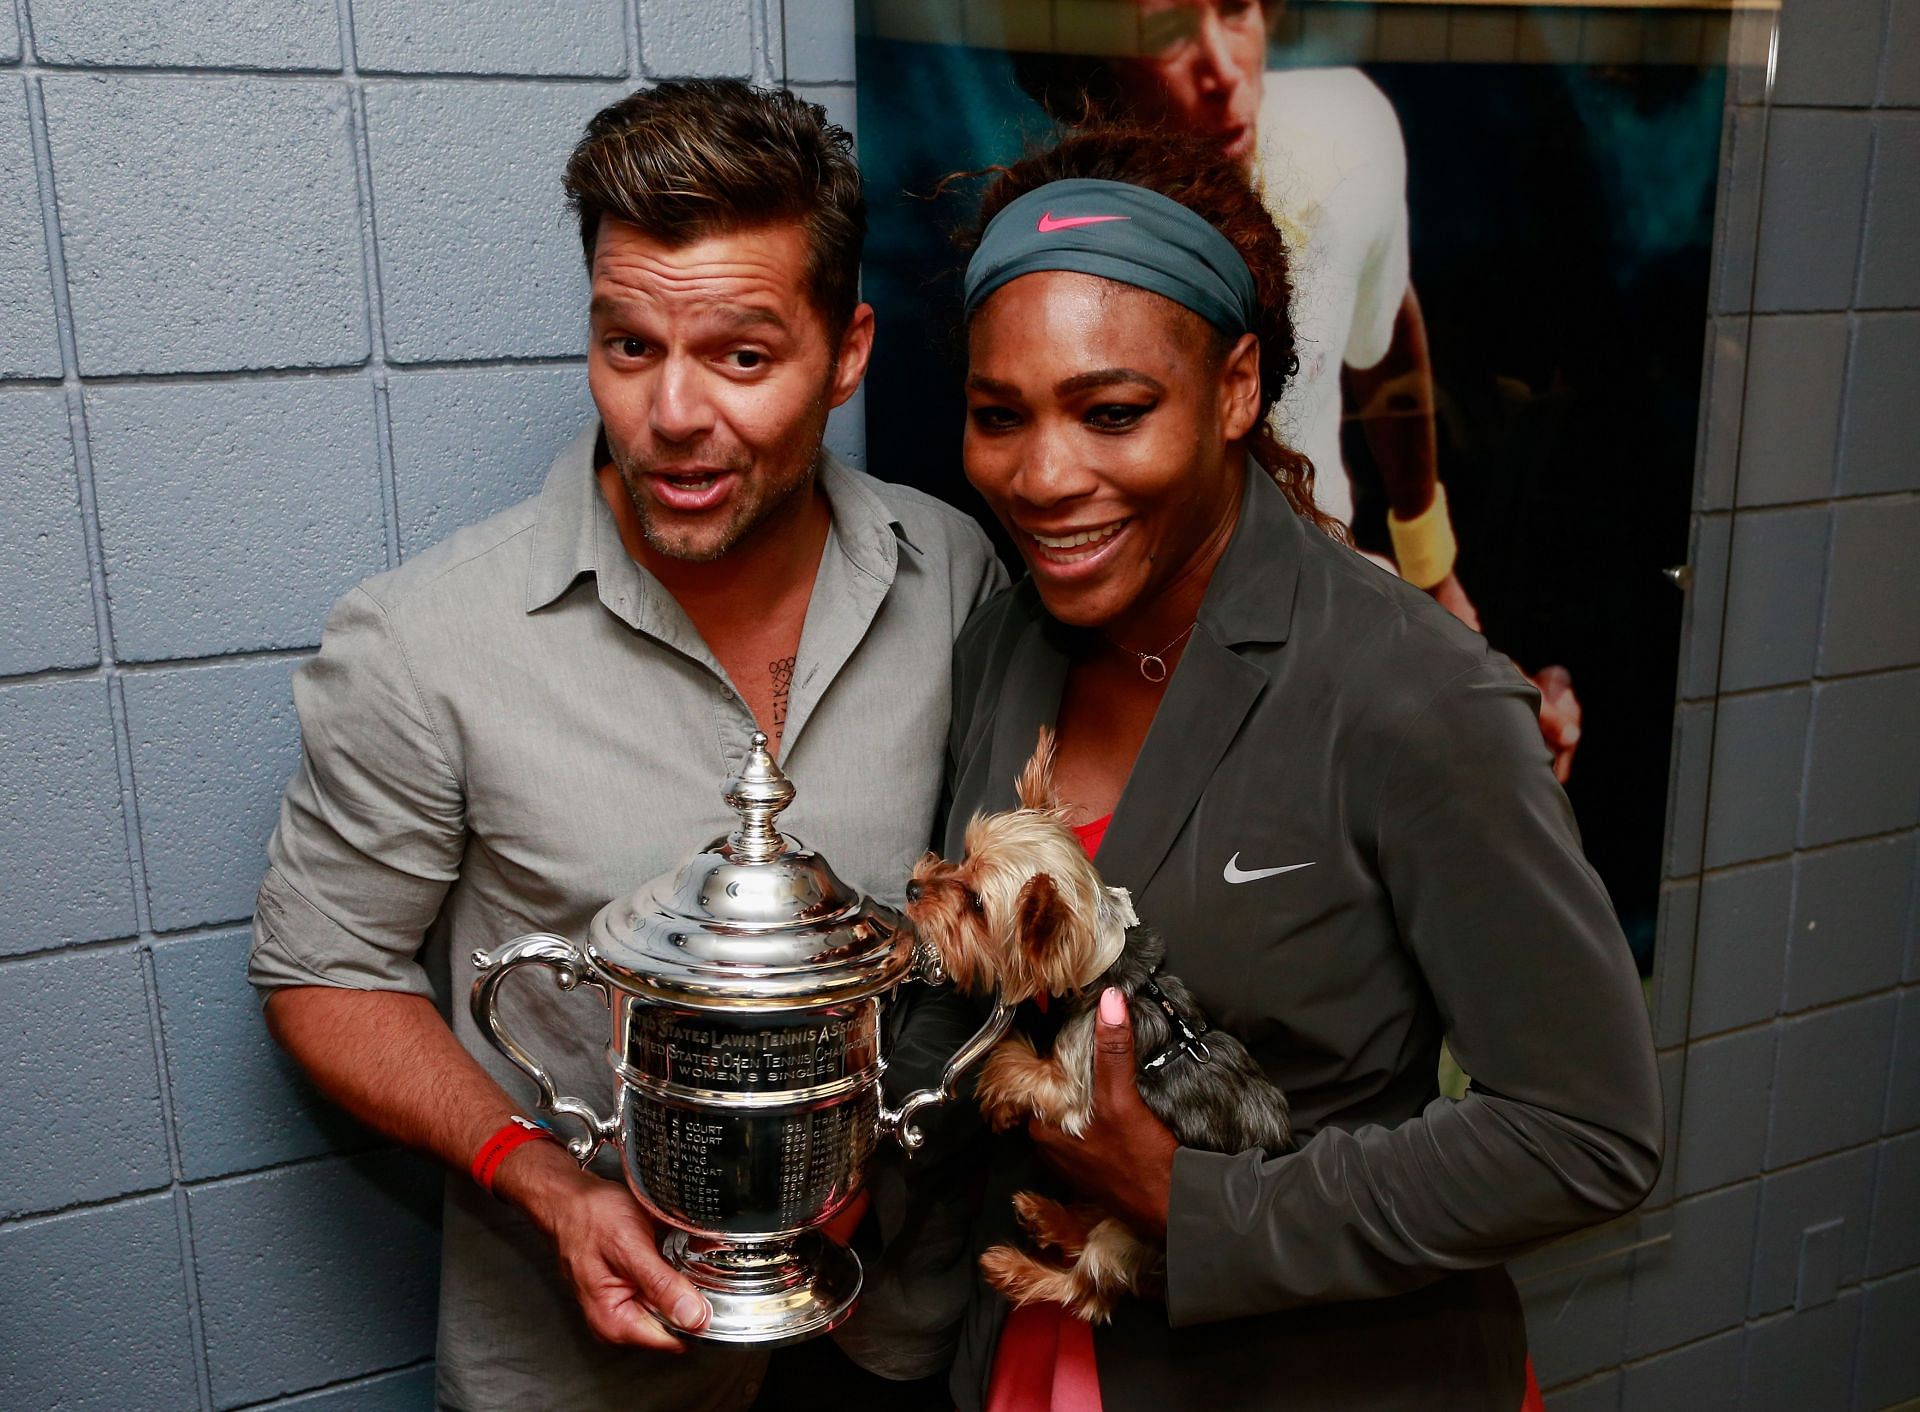 Serena Williams with Ricky Martin at the 2013 US Open